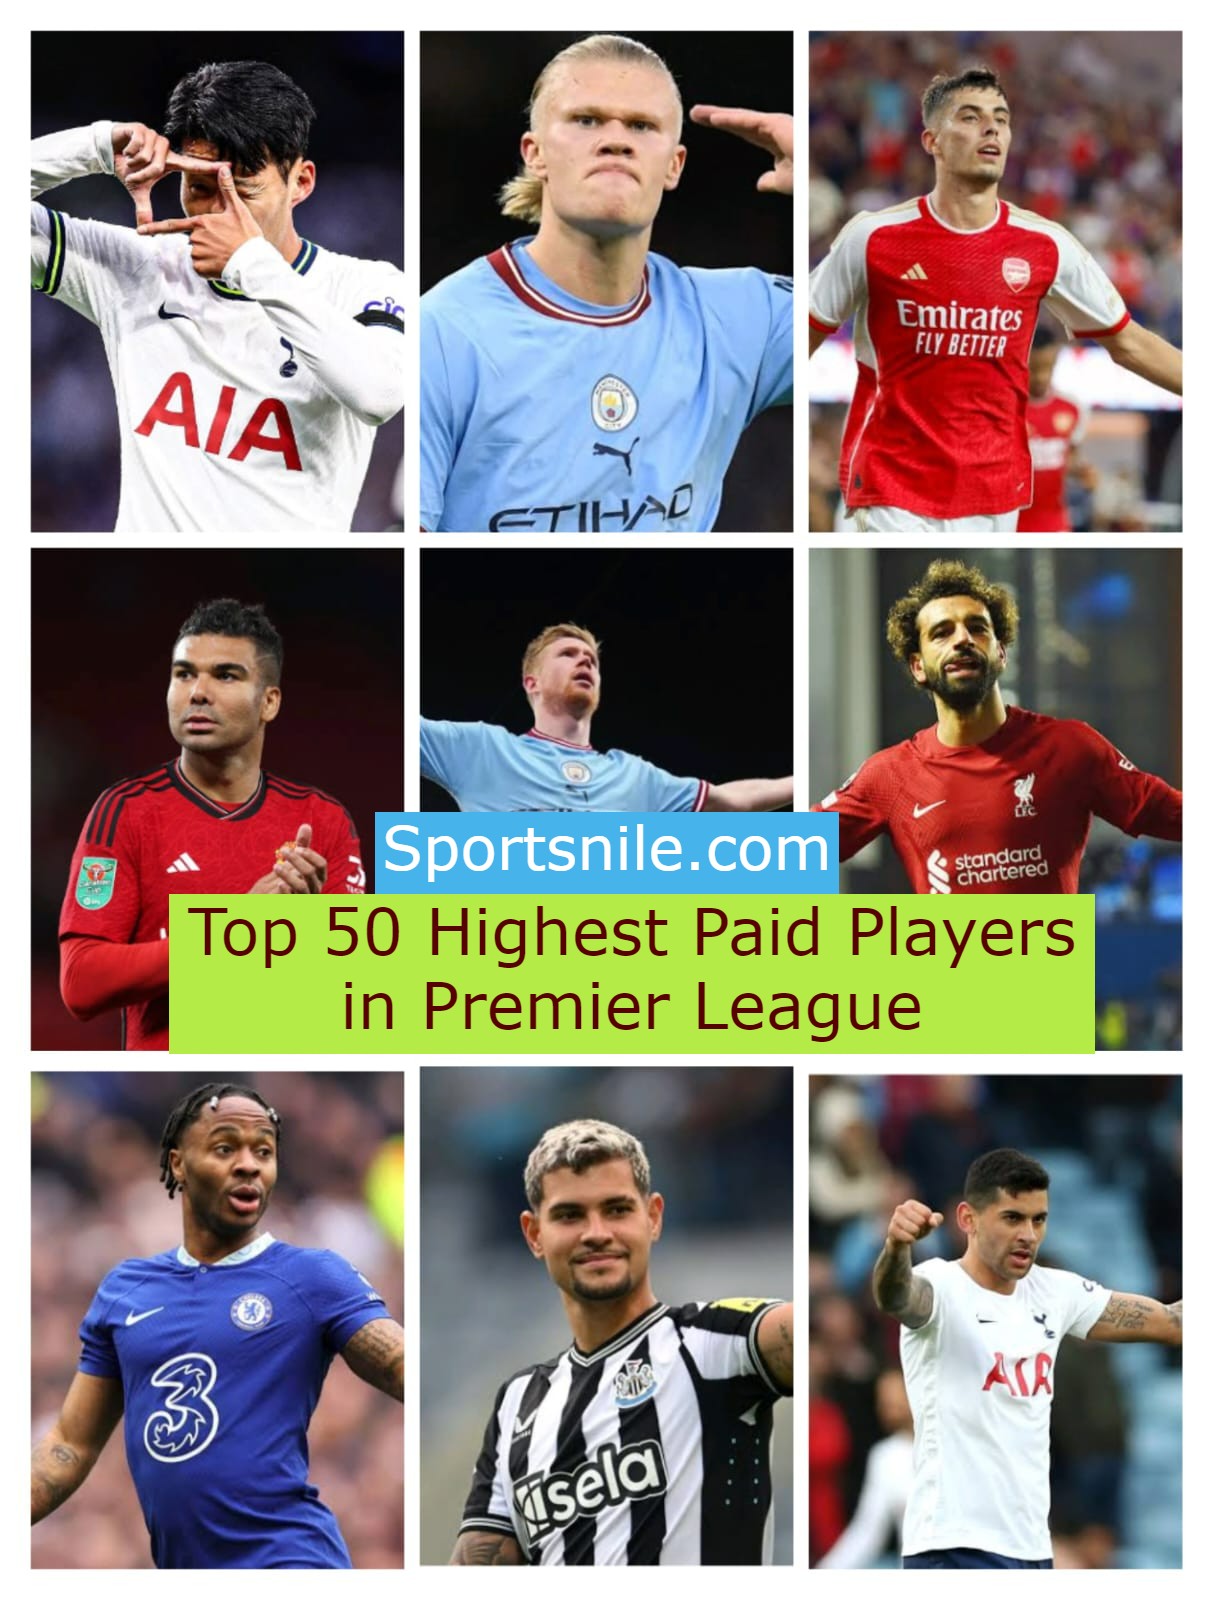 Top 50 Highest Paid Players in Premier League